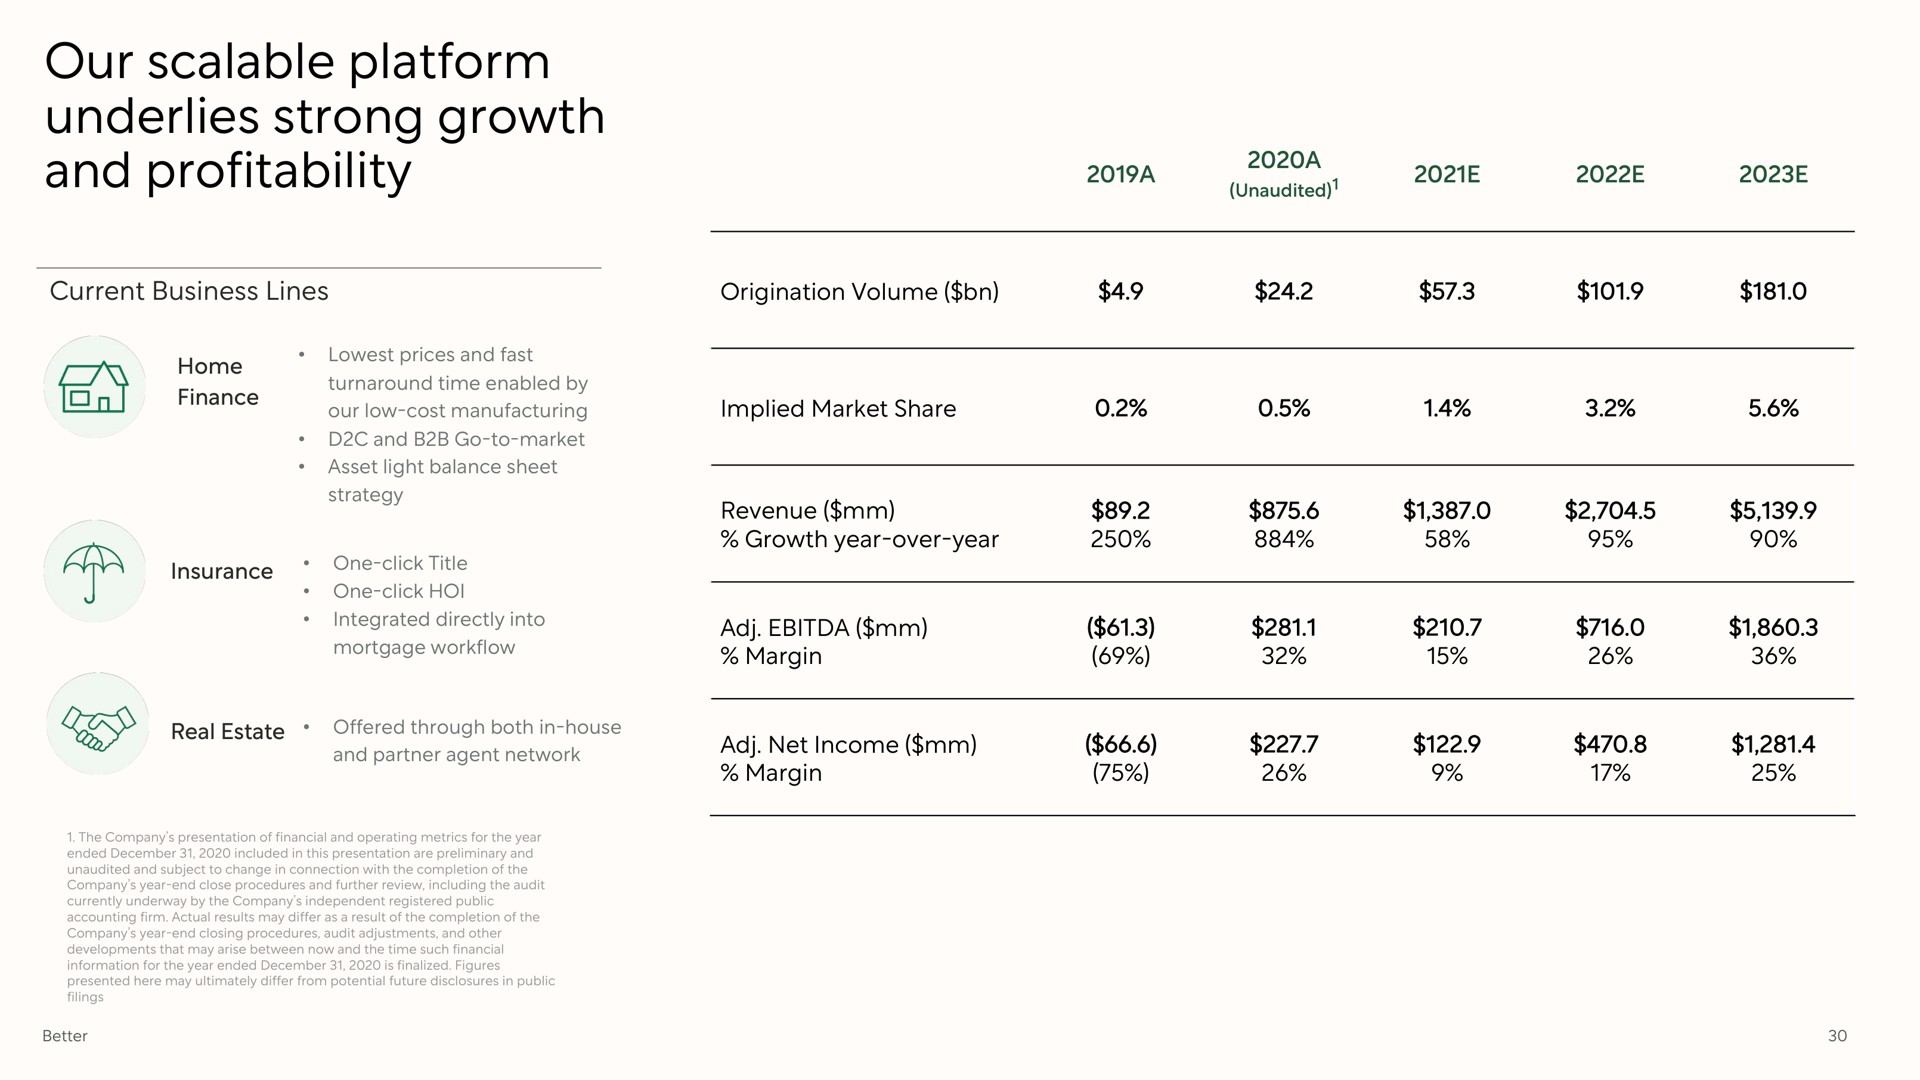 our scalable platform underlies strong growth and profitability | Better